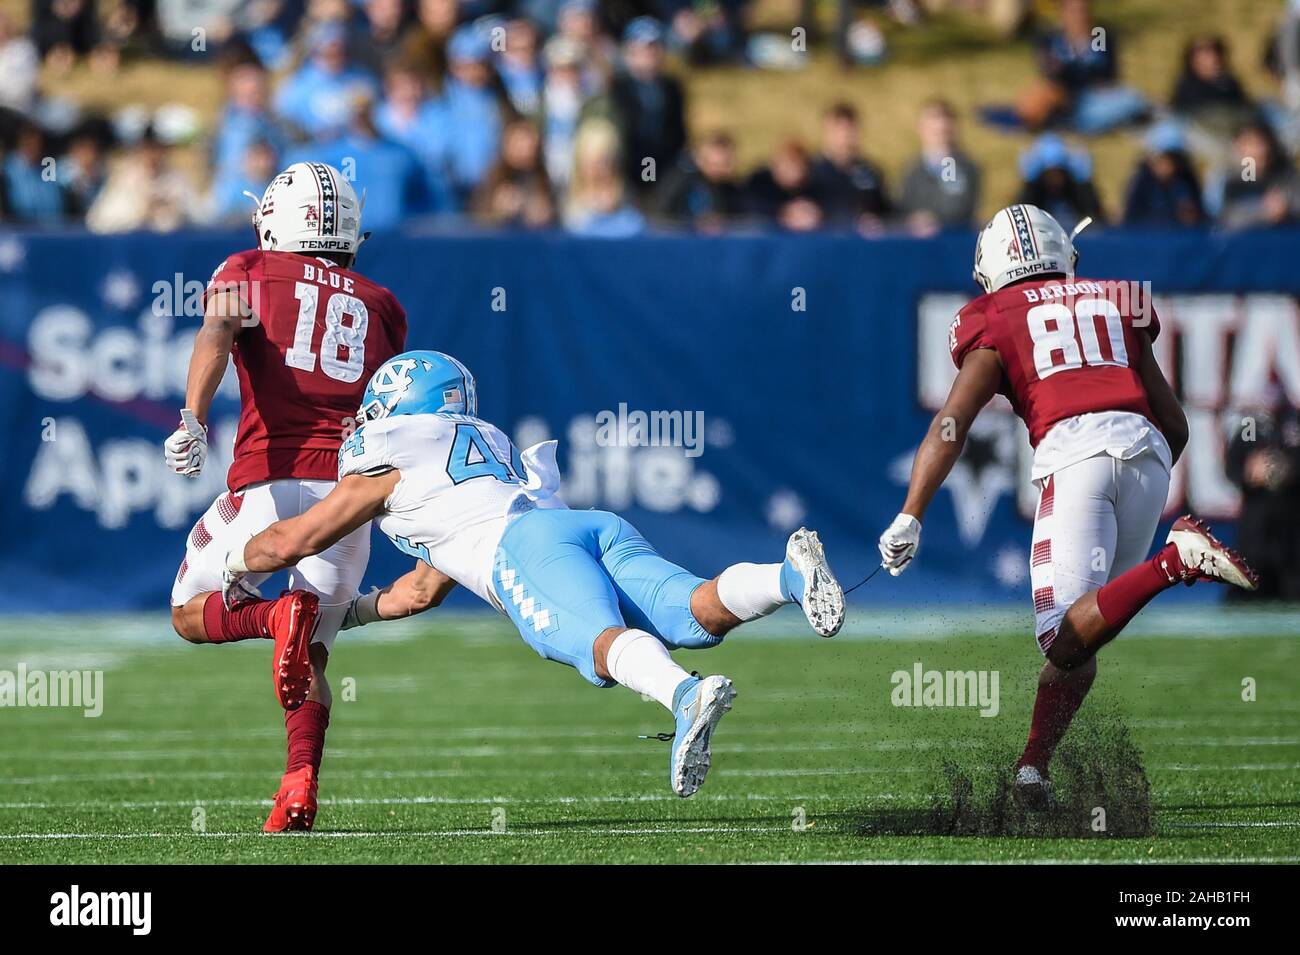 Annapolis, MD, USA. 27th Dec, 2019. Linebacker Jeremiah Gemmel (44) of the North Carolina Tar Heels tries to tackle wide receiver Jadan Blue (18) of the Temple Owls during the matchup between UNC Tar Heels and the Temple Owls at the Military Bowl at the Navy-Marine Corps Memorial Stadium in Annapolis, MD. Credit: csm/Alamy Live News Stock Photo